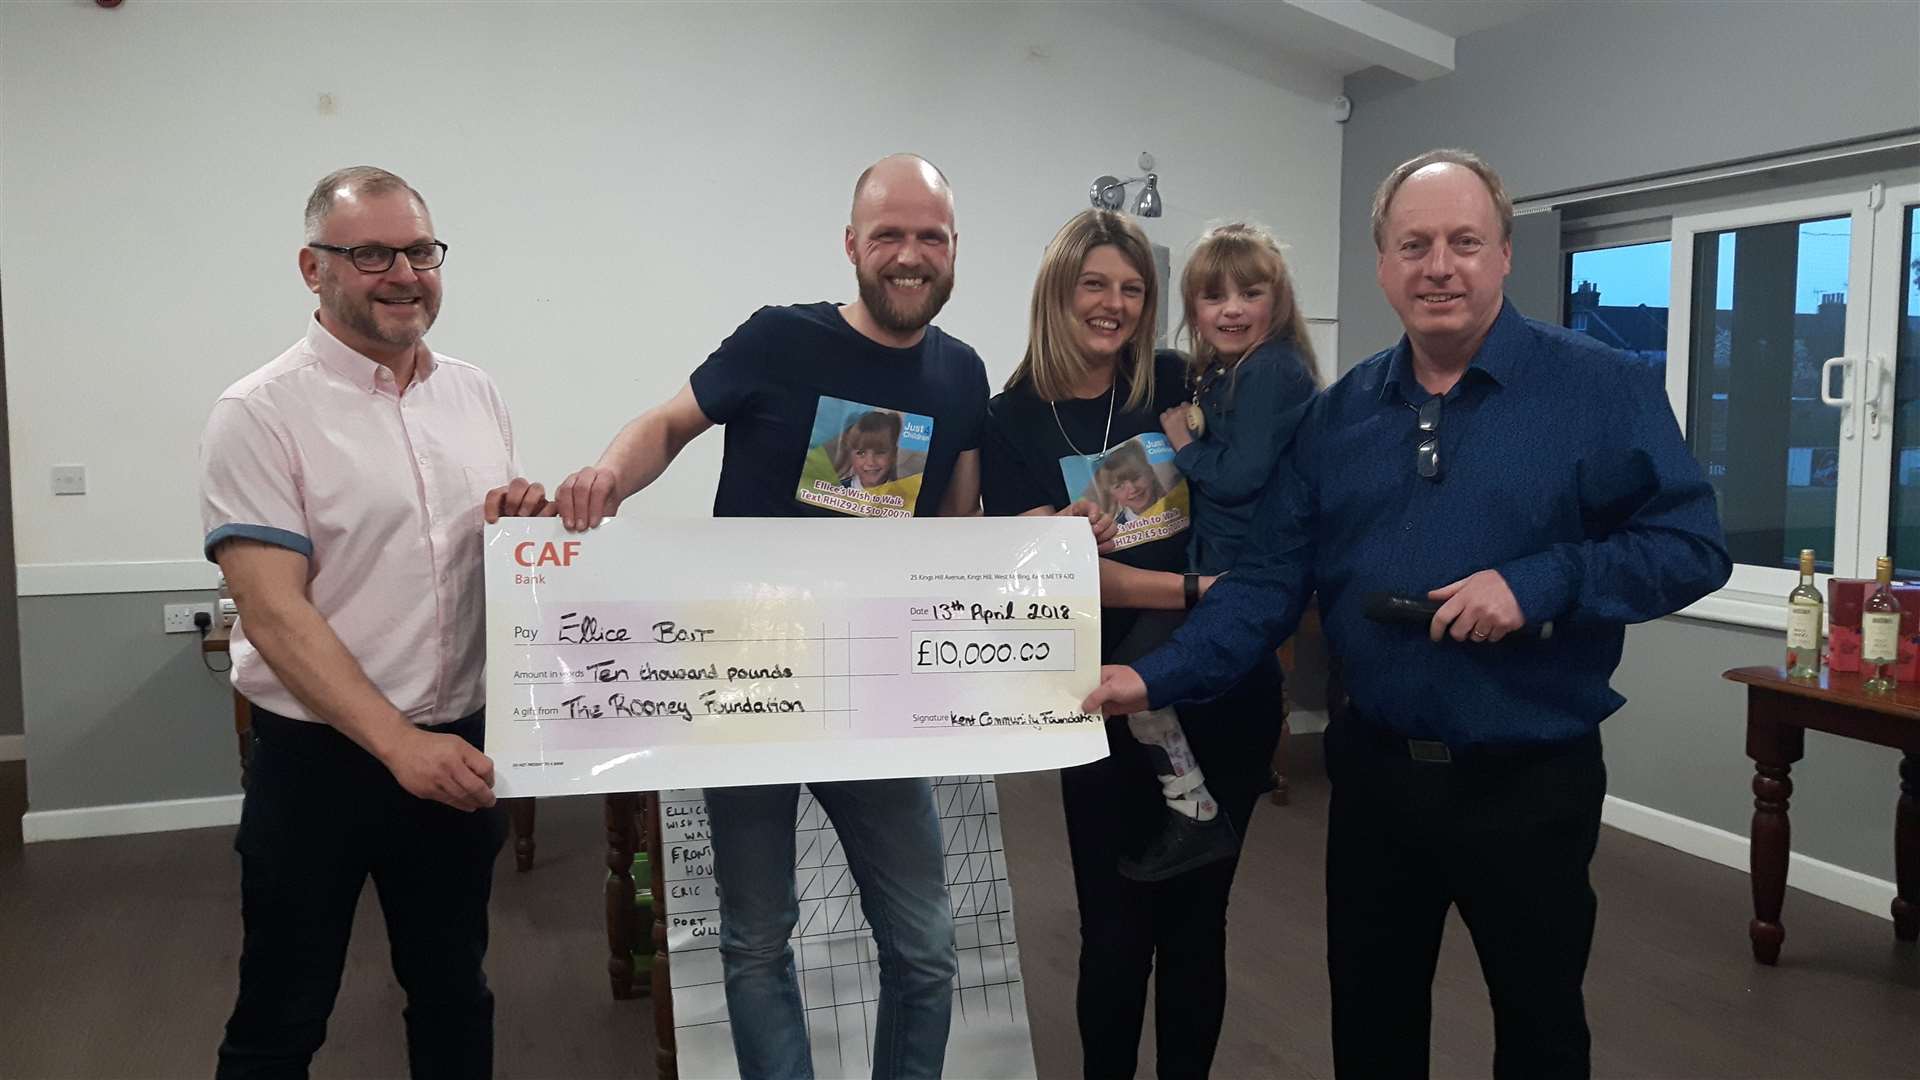 Robert Bagley MBE (left) and grant fundraiser Colin Smith MBE (right) present a cheque to Ellice Barr and her parents, Joe and Amy.